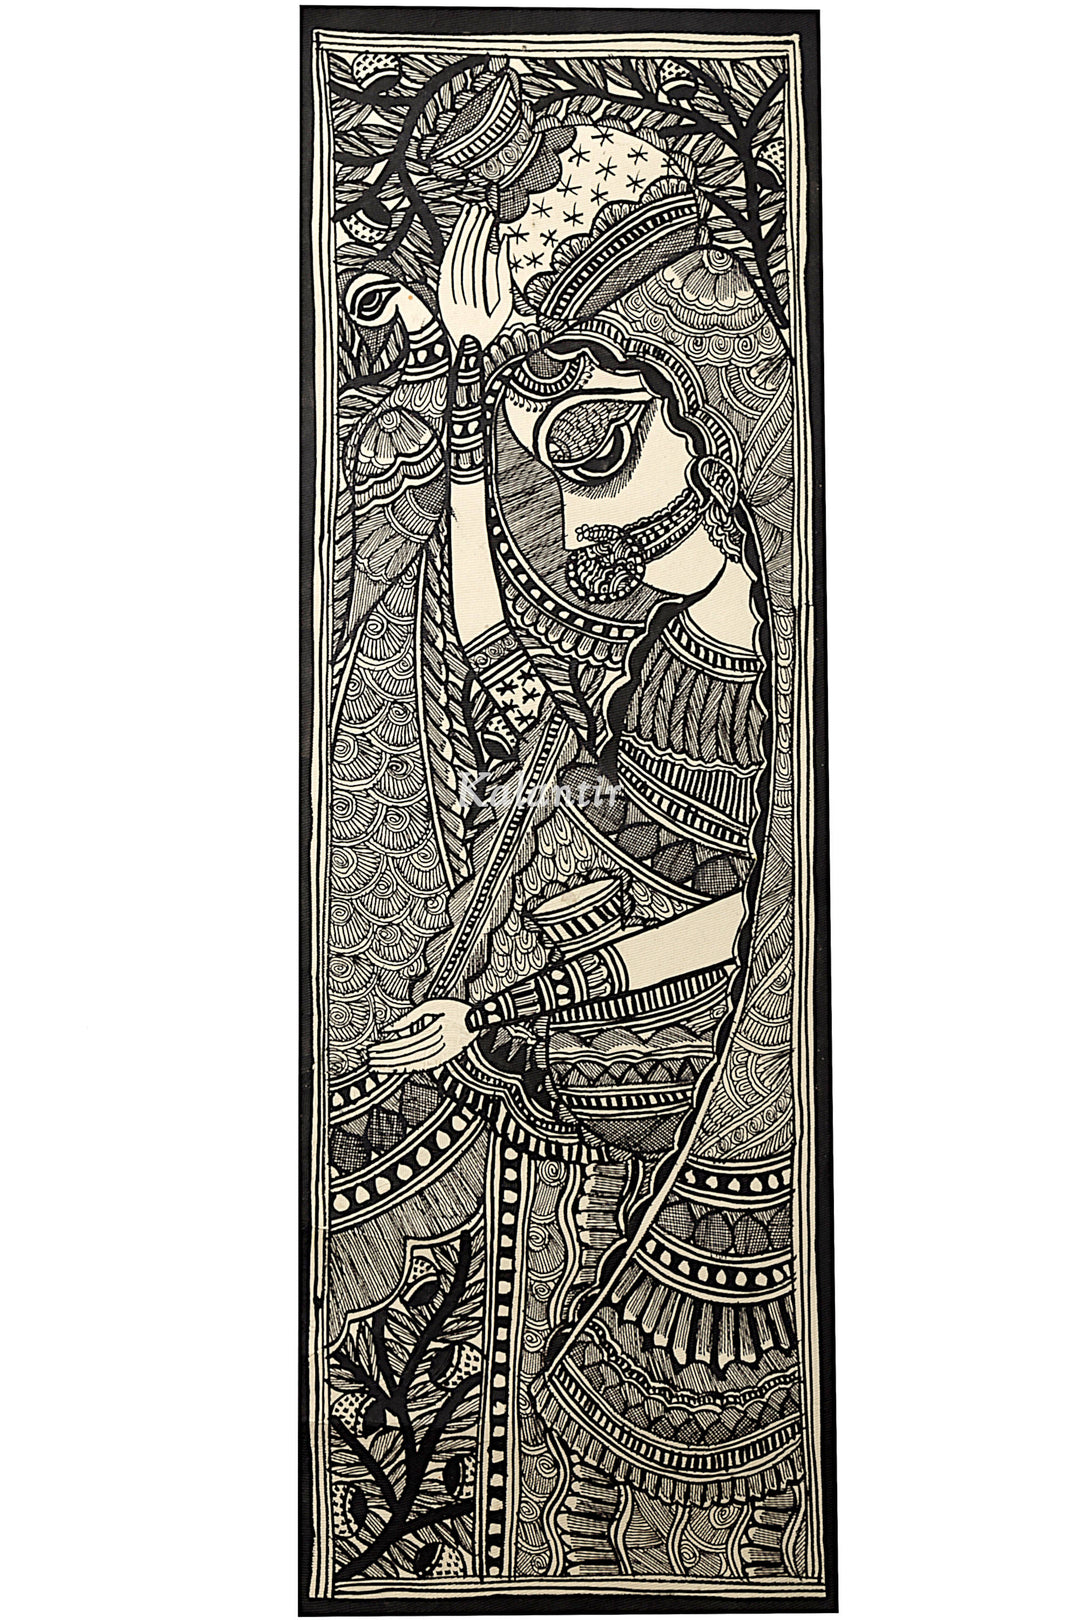 Full-length view of the portrait of a village woman in this Madhubani Painting